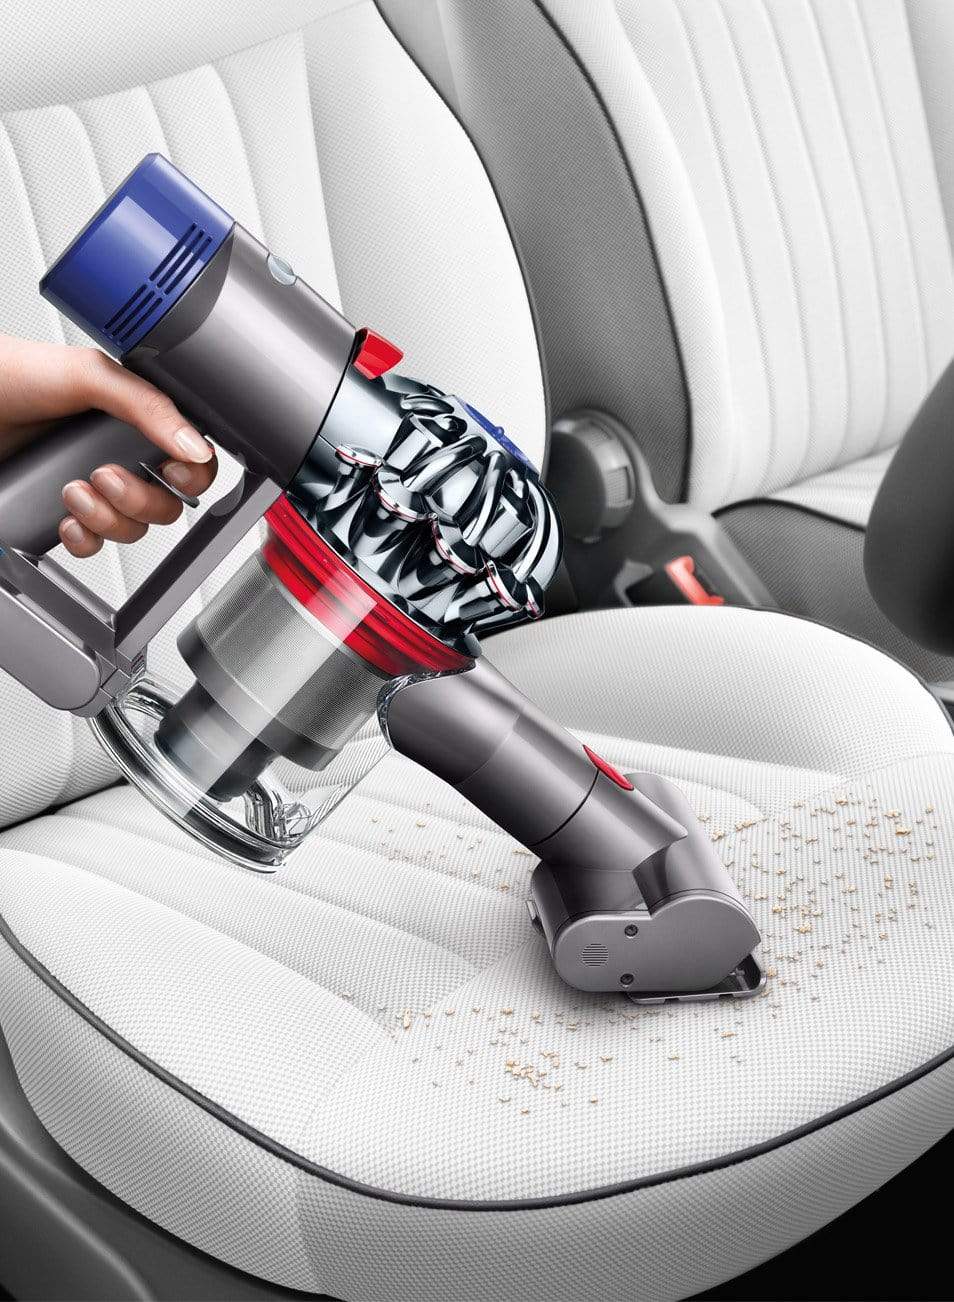 Dyson V8 Cyclone Absolute Vacuum Cleaner - V8